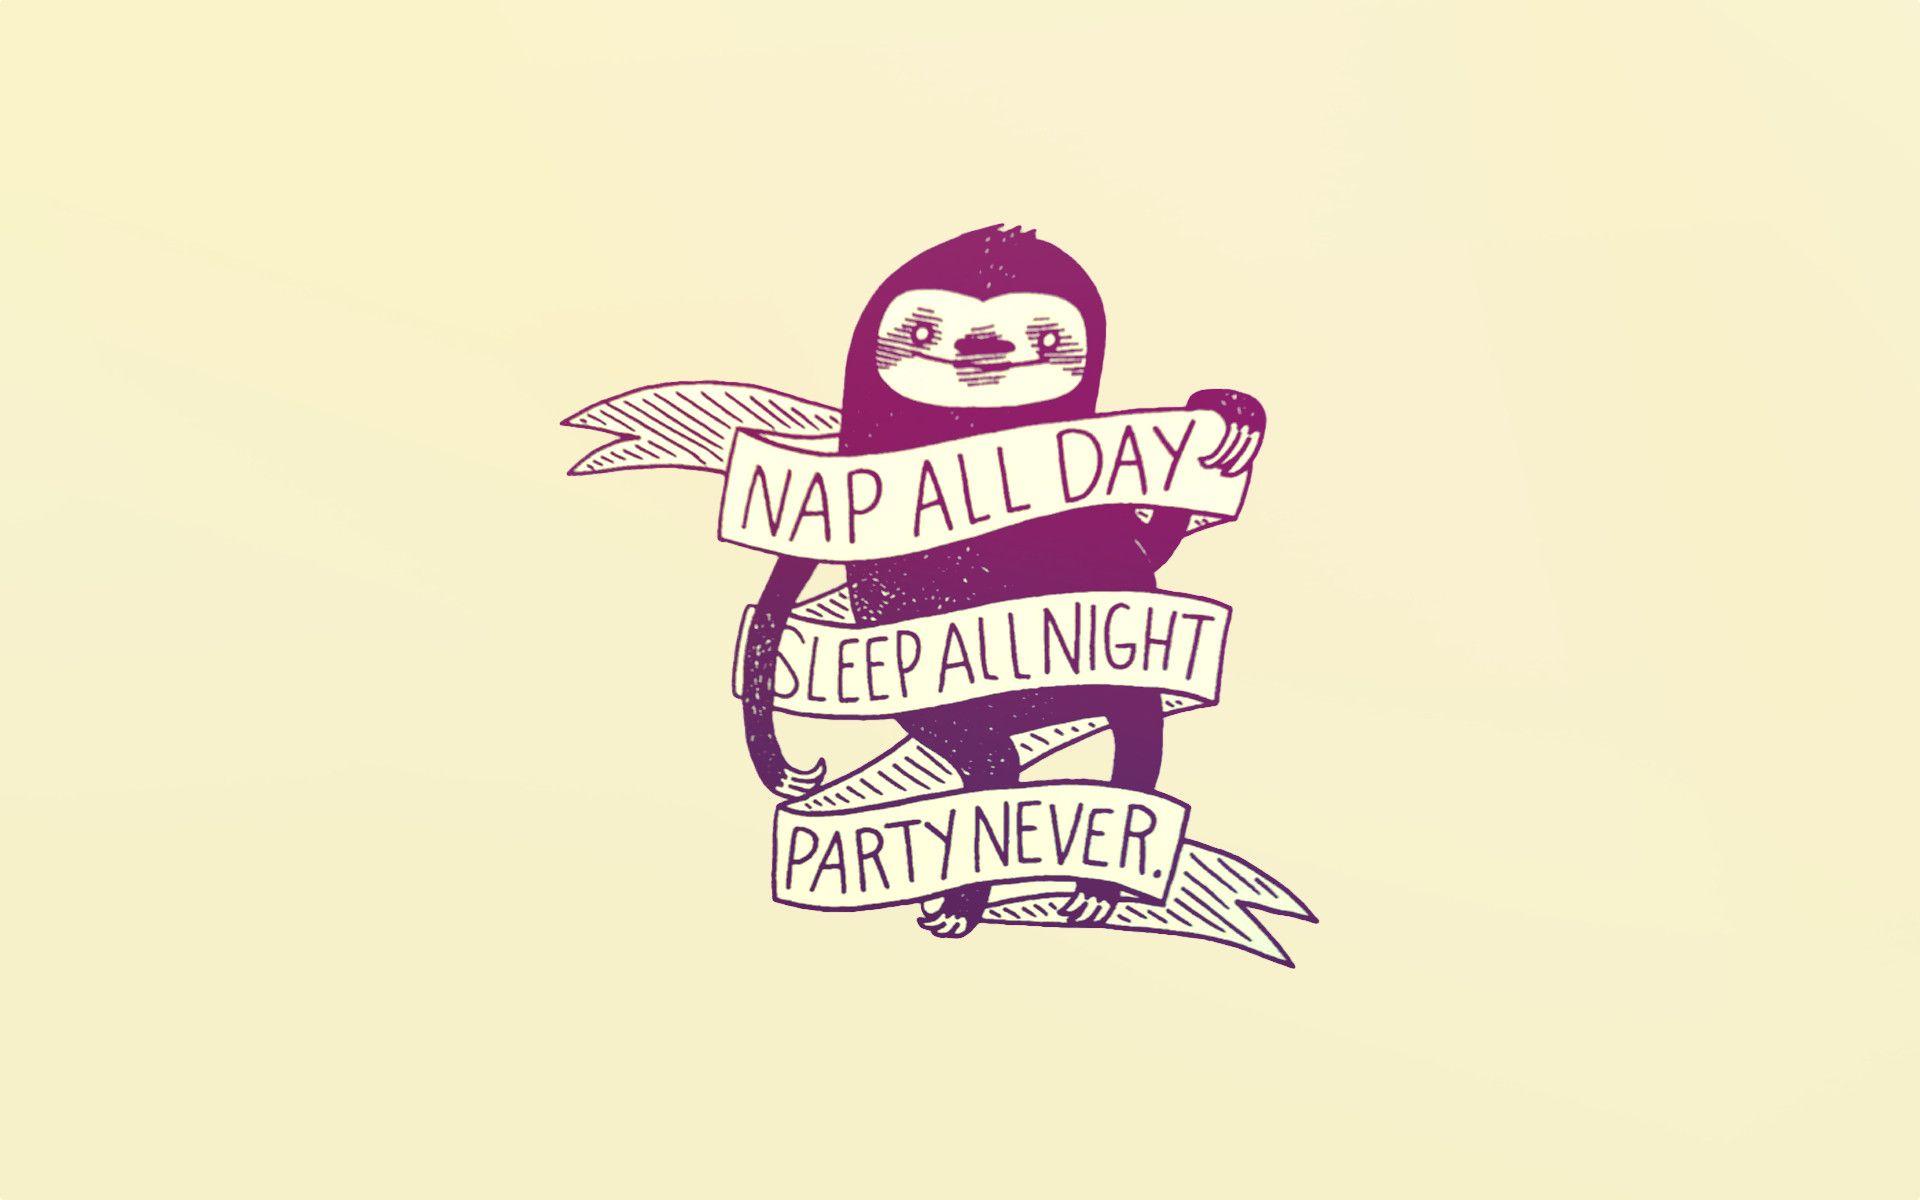 Made a wallpapers out of "Nap all day" sloth wallpapers